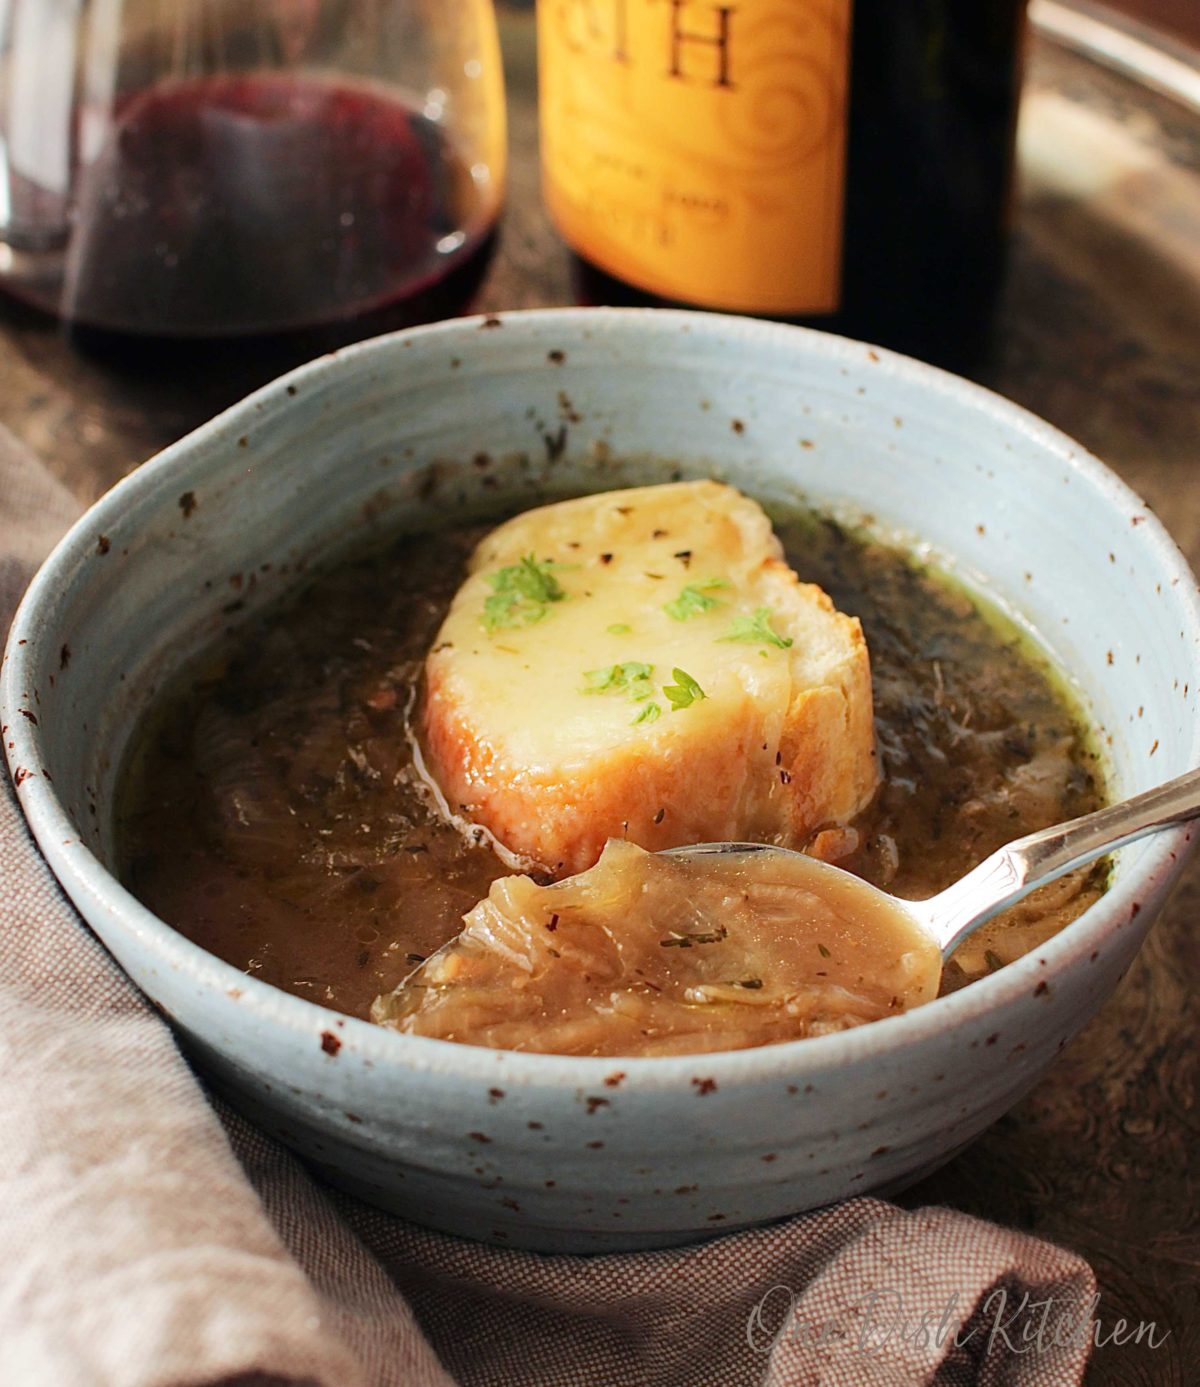 A spoonful of french onion soup from a bowl on a metal tray with a glass and bottle of red wine.